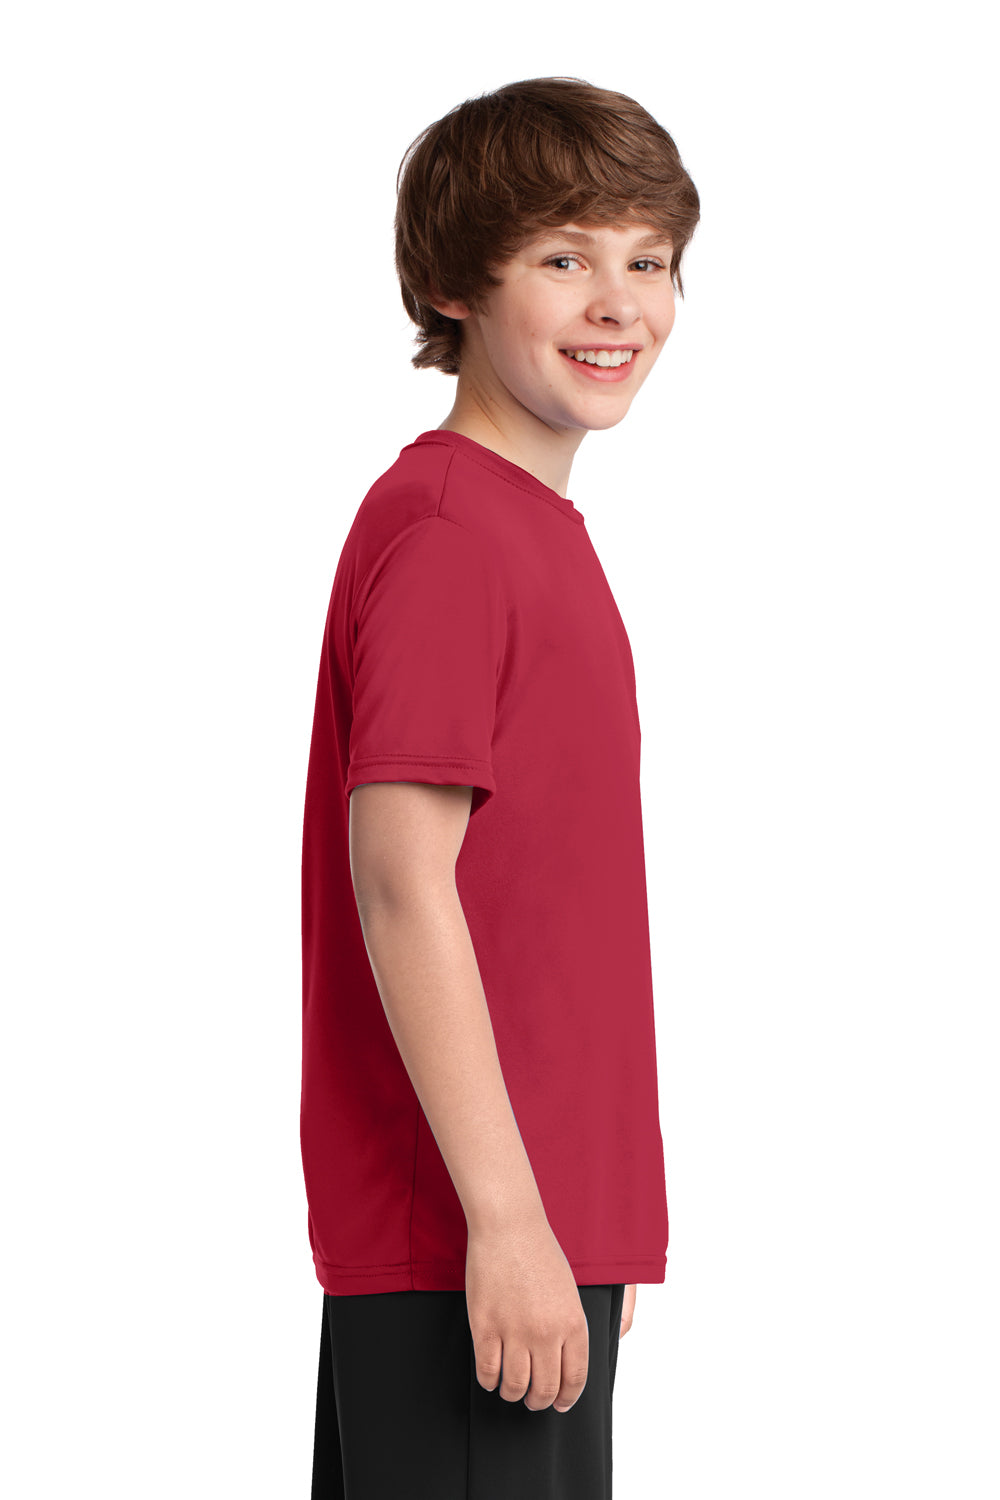 Port & Company PC380Y Youth Dry Zone Performance Moisture Wicking Short Sleeve Crewneck T-Shirt Red Side